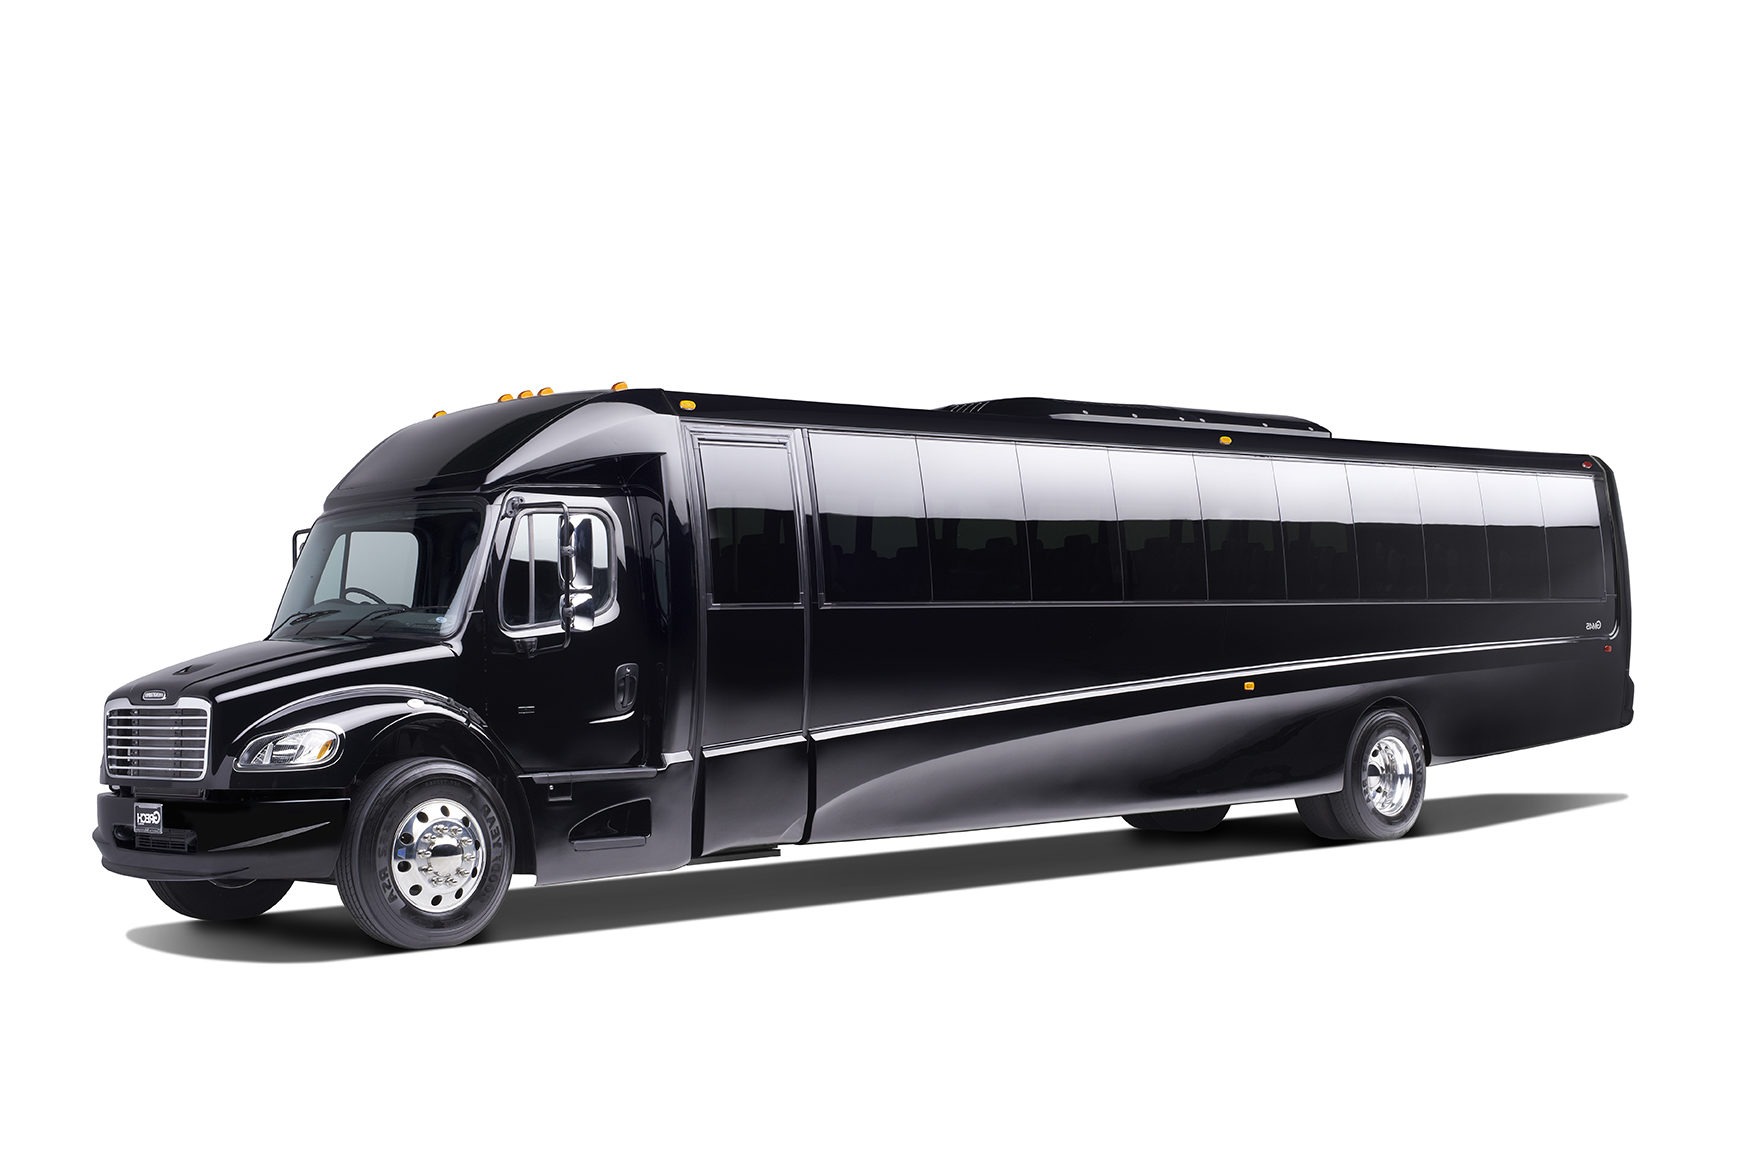 36 passenger coach bus for hire in New York City